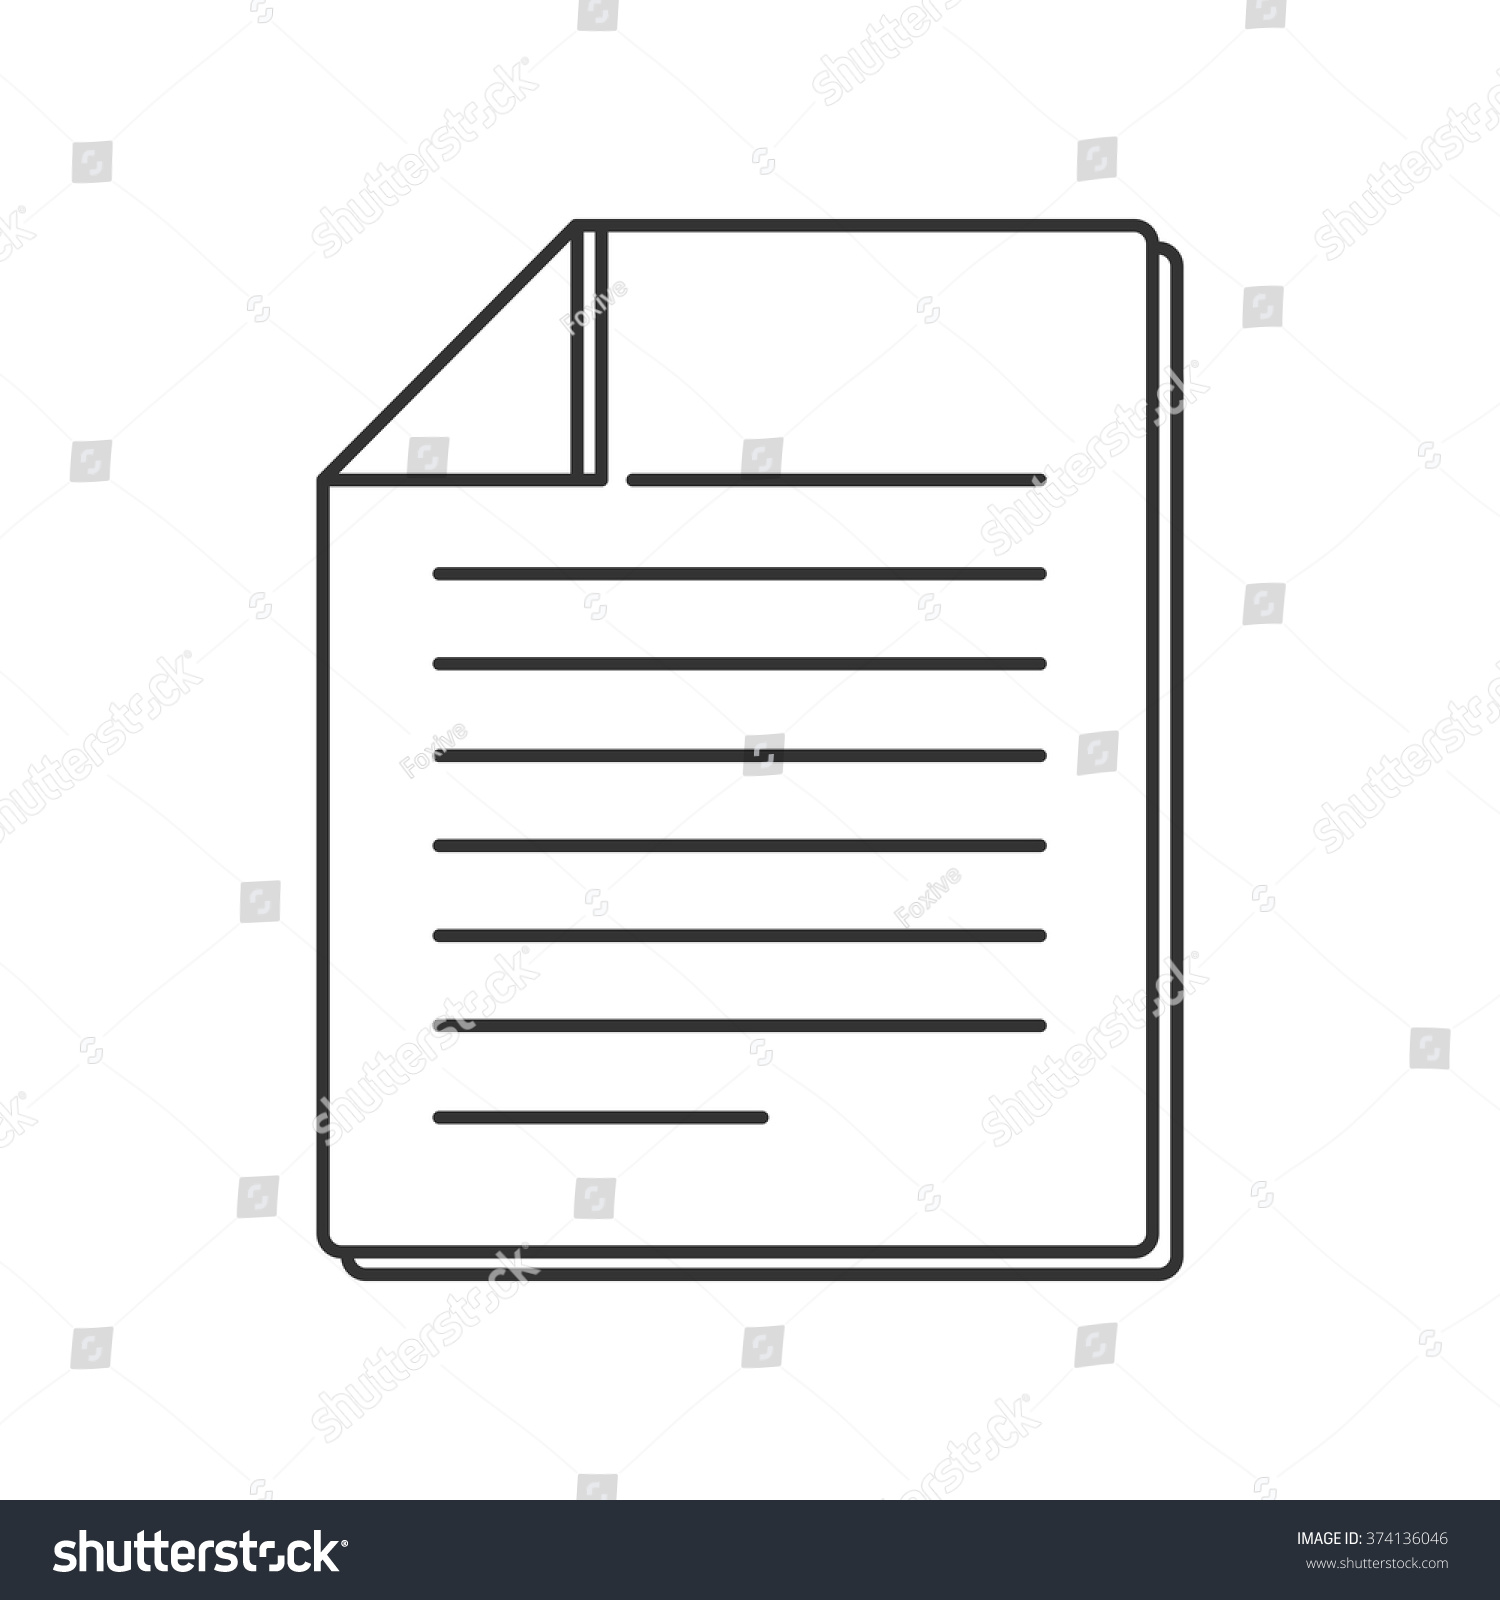 Silhouette sheet paper icon Royalty Free Vector Image